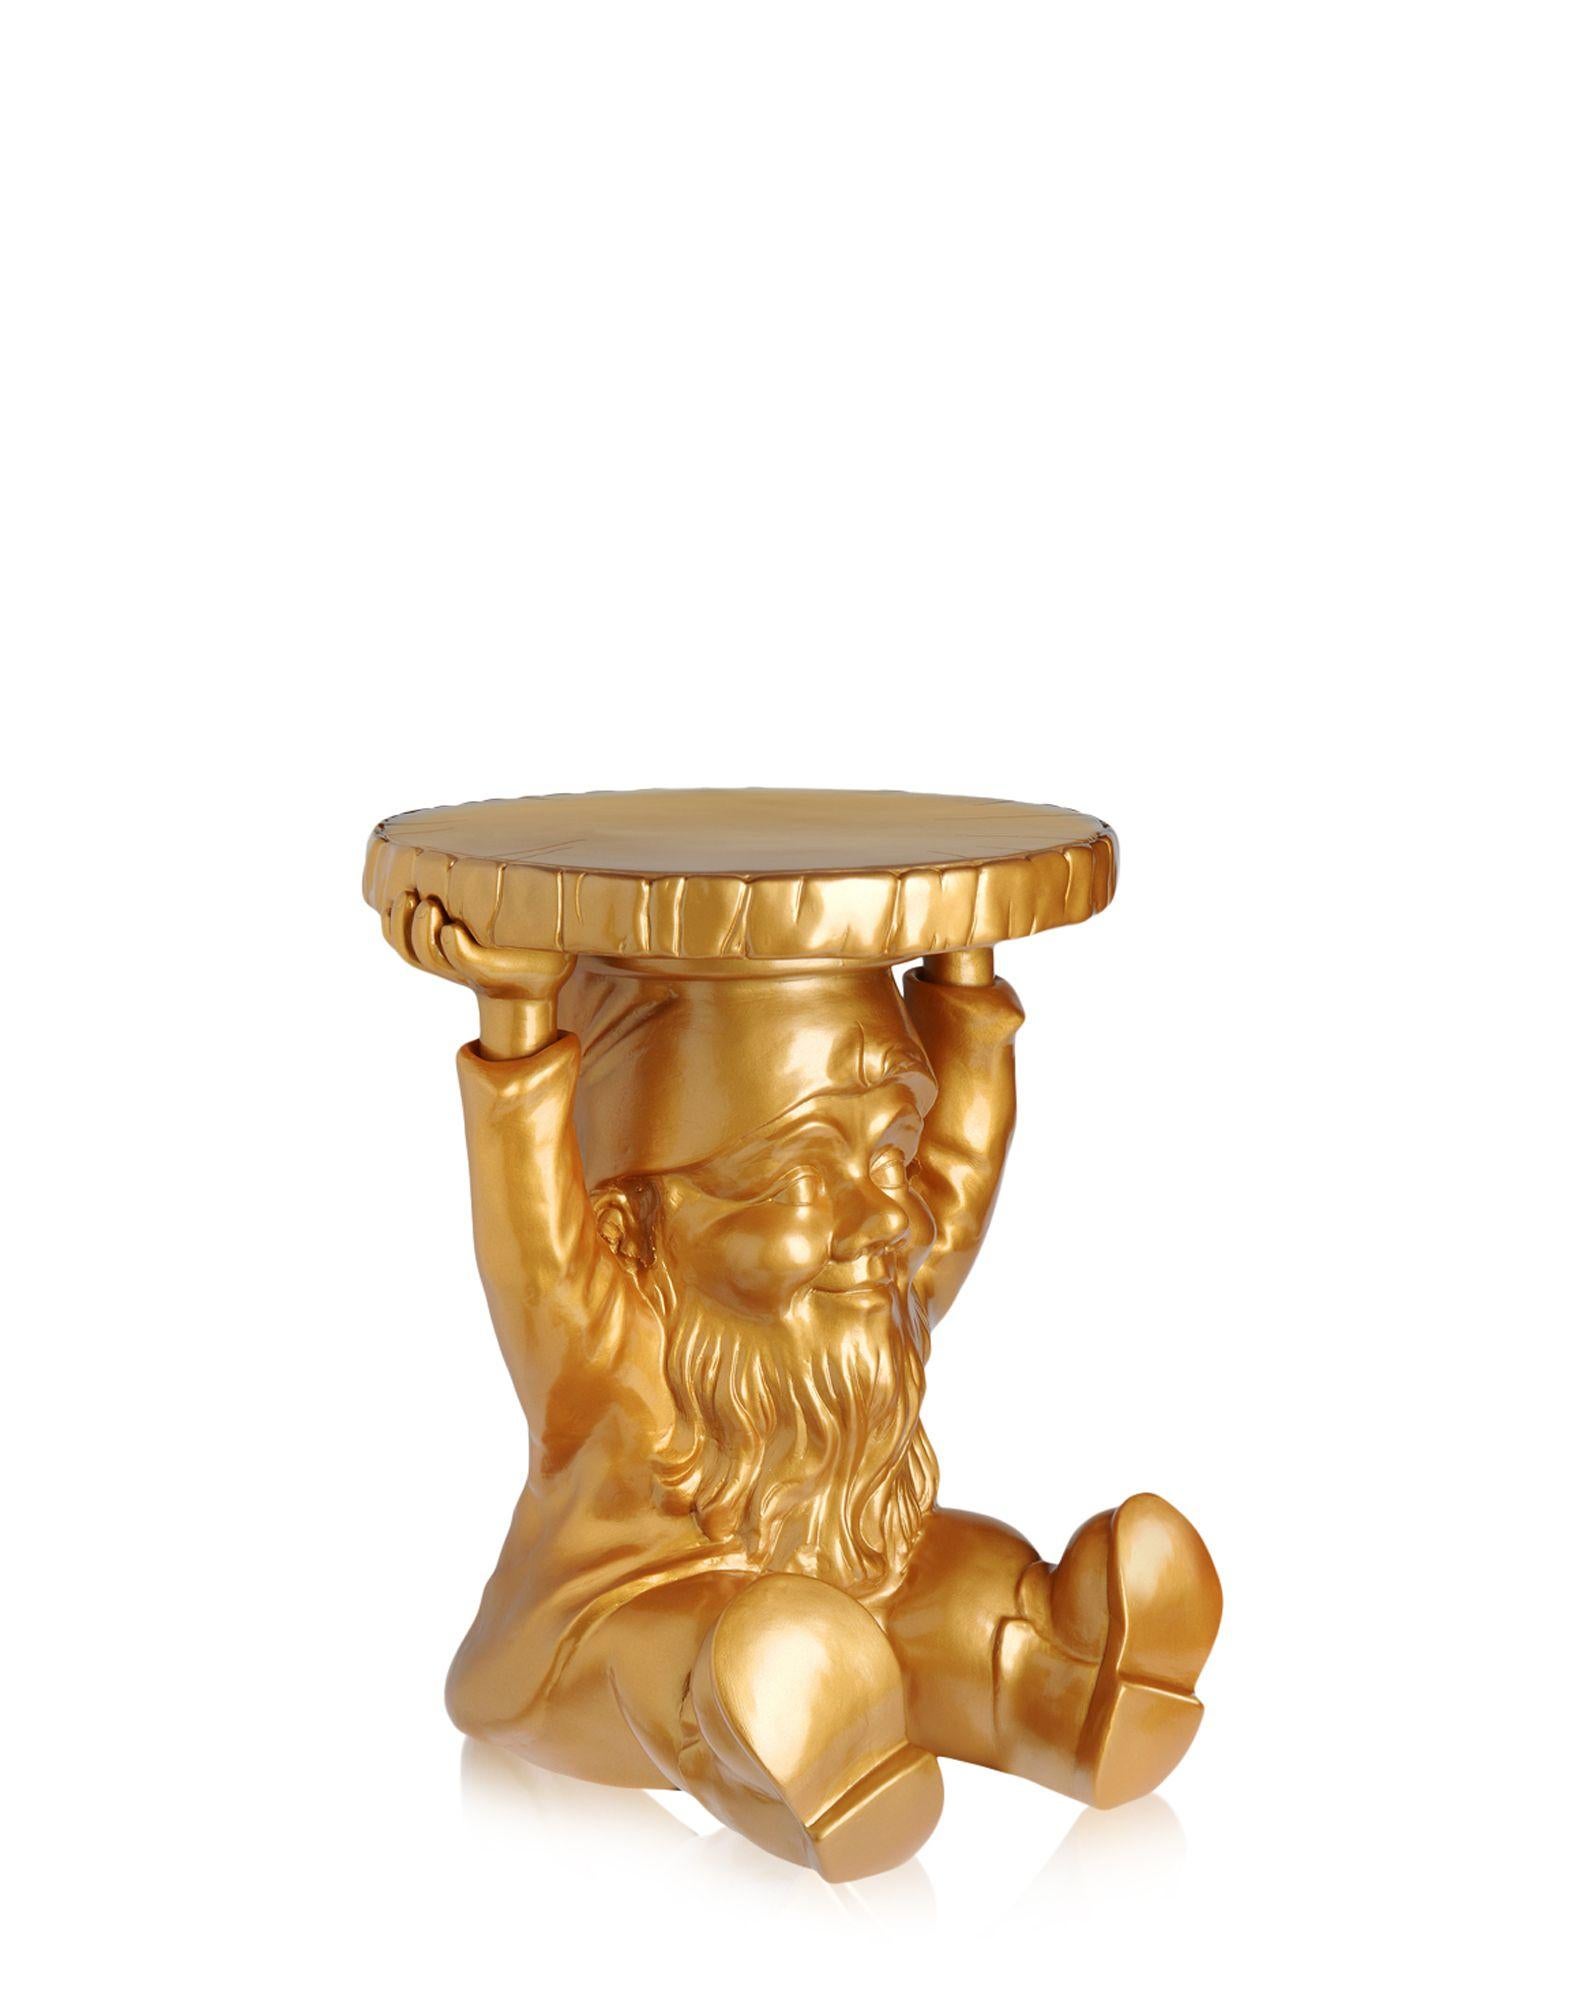 Attila table-stool, is a charismatic personality of striking originality and anti-conformism. Stools and tables which are cute and humorous but with one eye on functionality, thought up to furnish every setting imaginable. The gnome hats, in fact,